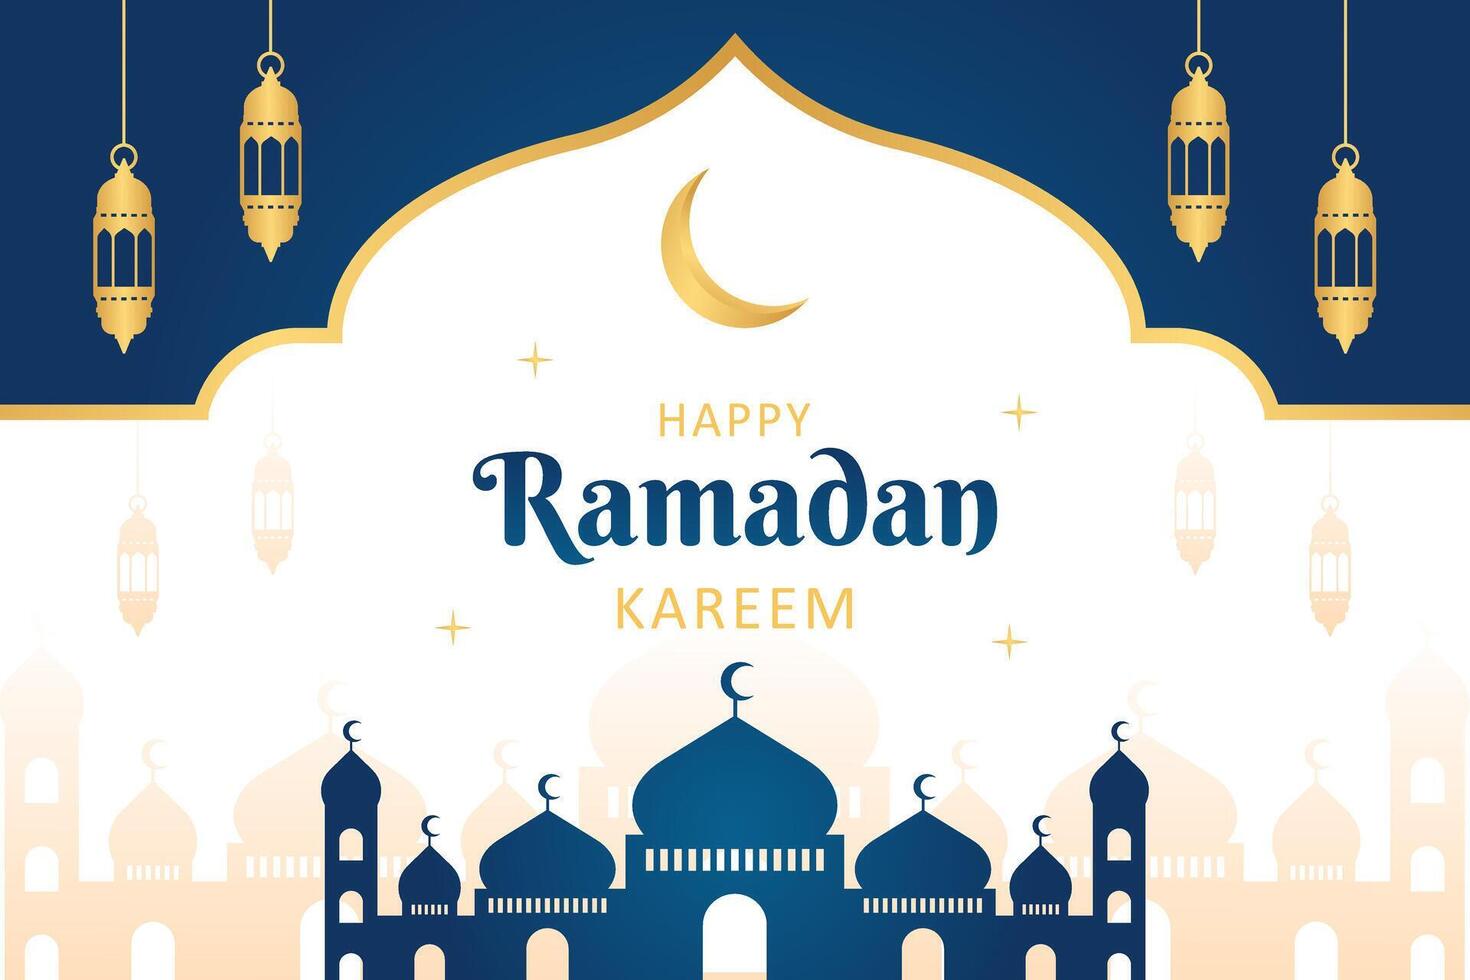 Islamic Ramadan celebration template banner design with gold frame, lantern, and mosque illustration. Beautiful Ramadan background and border vector